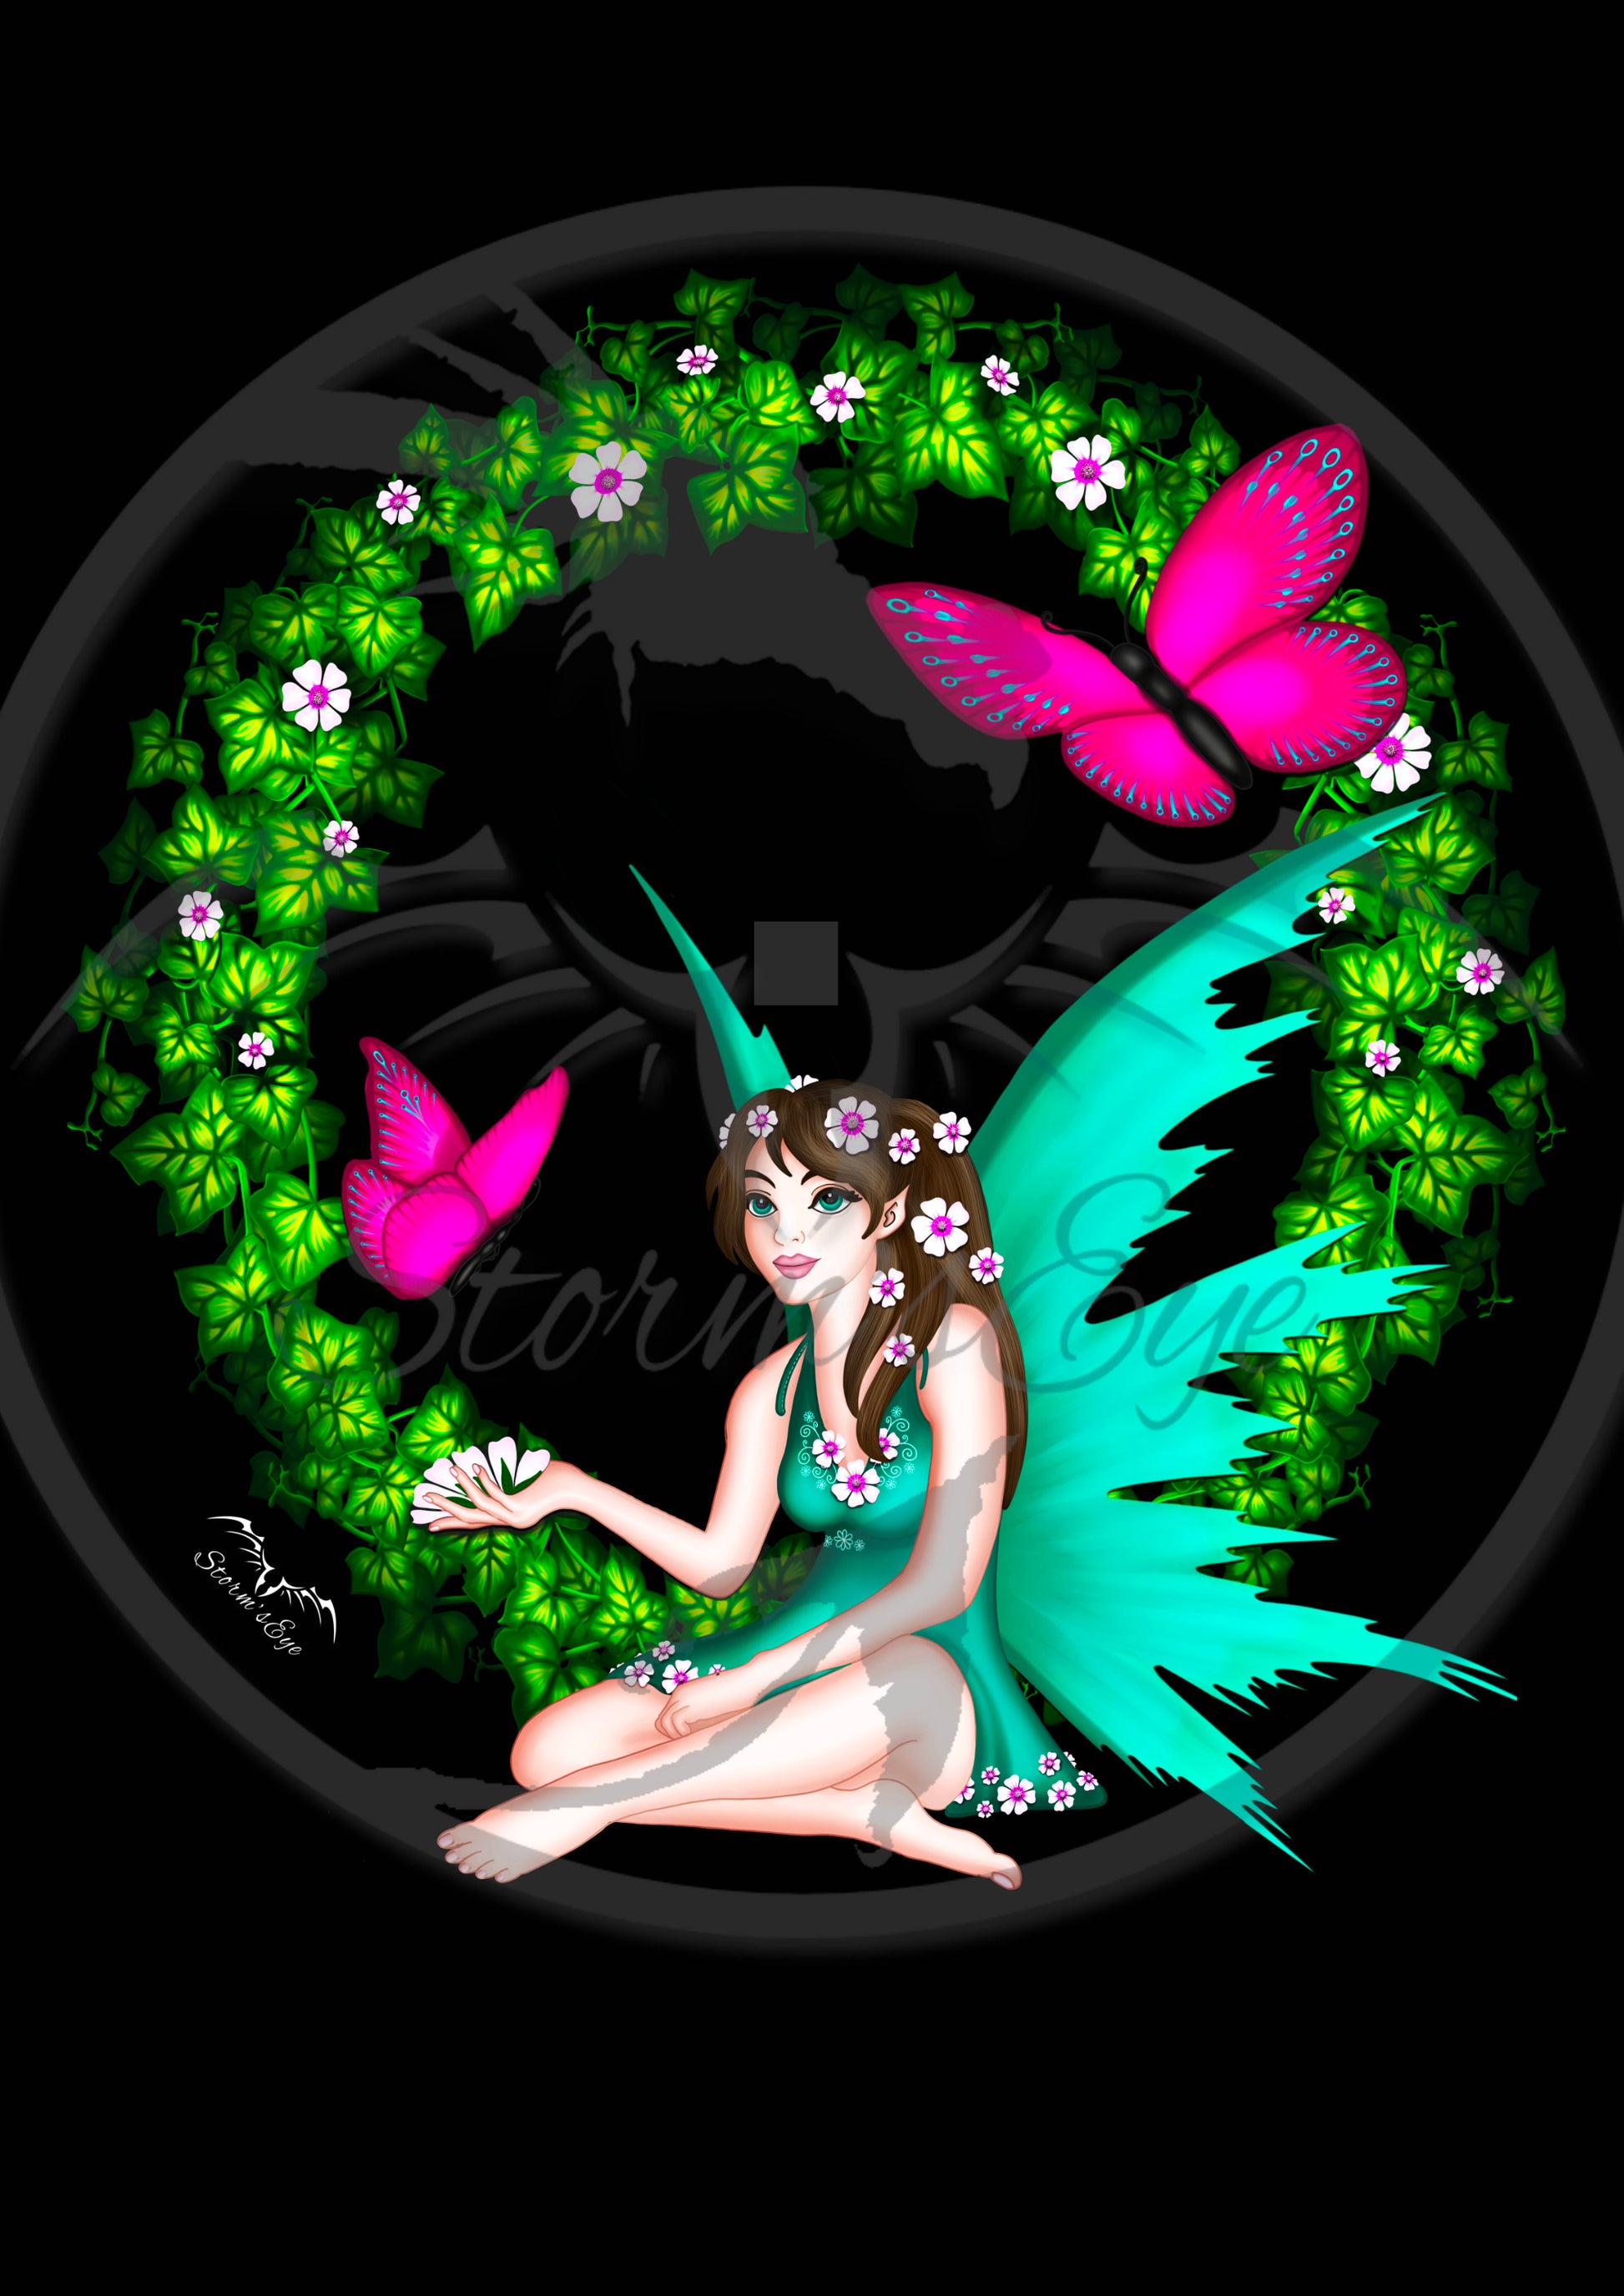 Butterfly Fairy design, by Stormseye Design